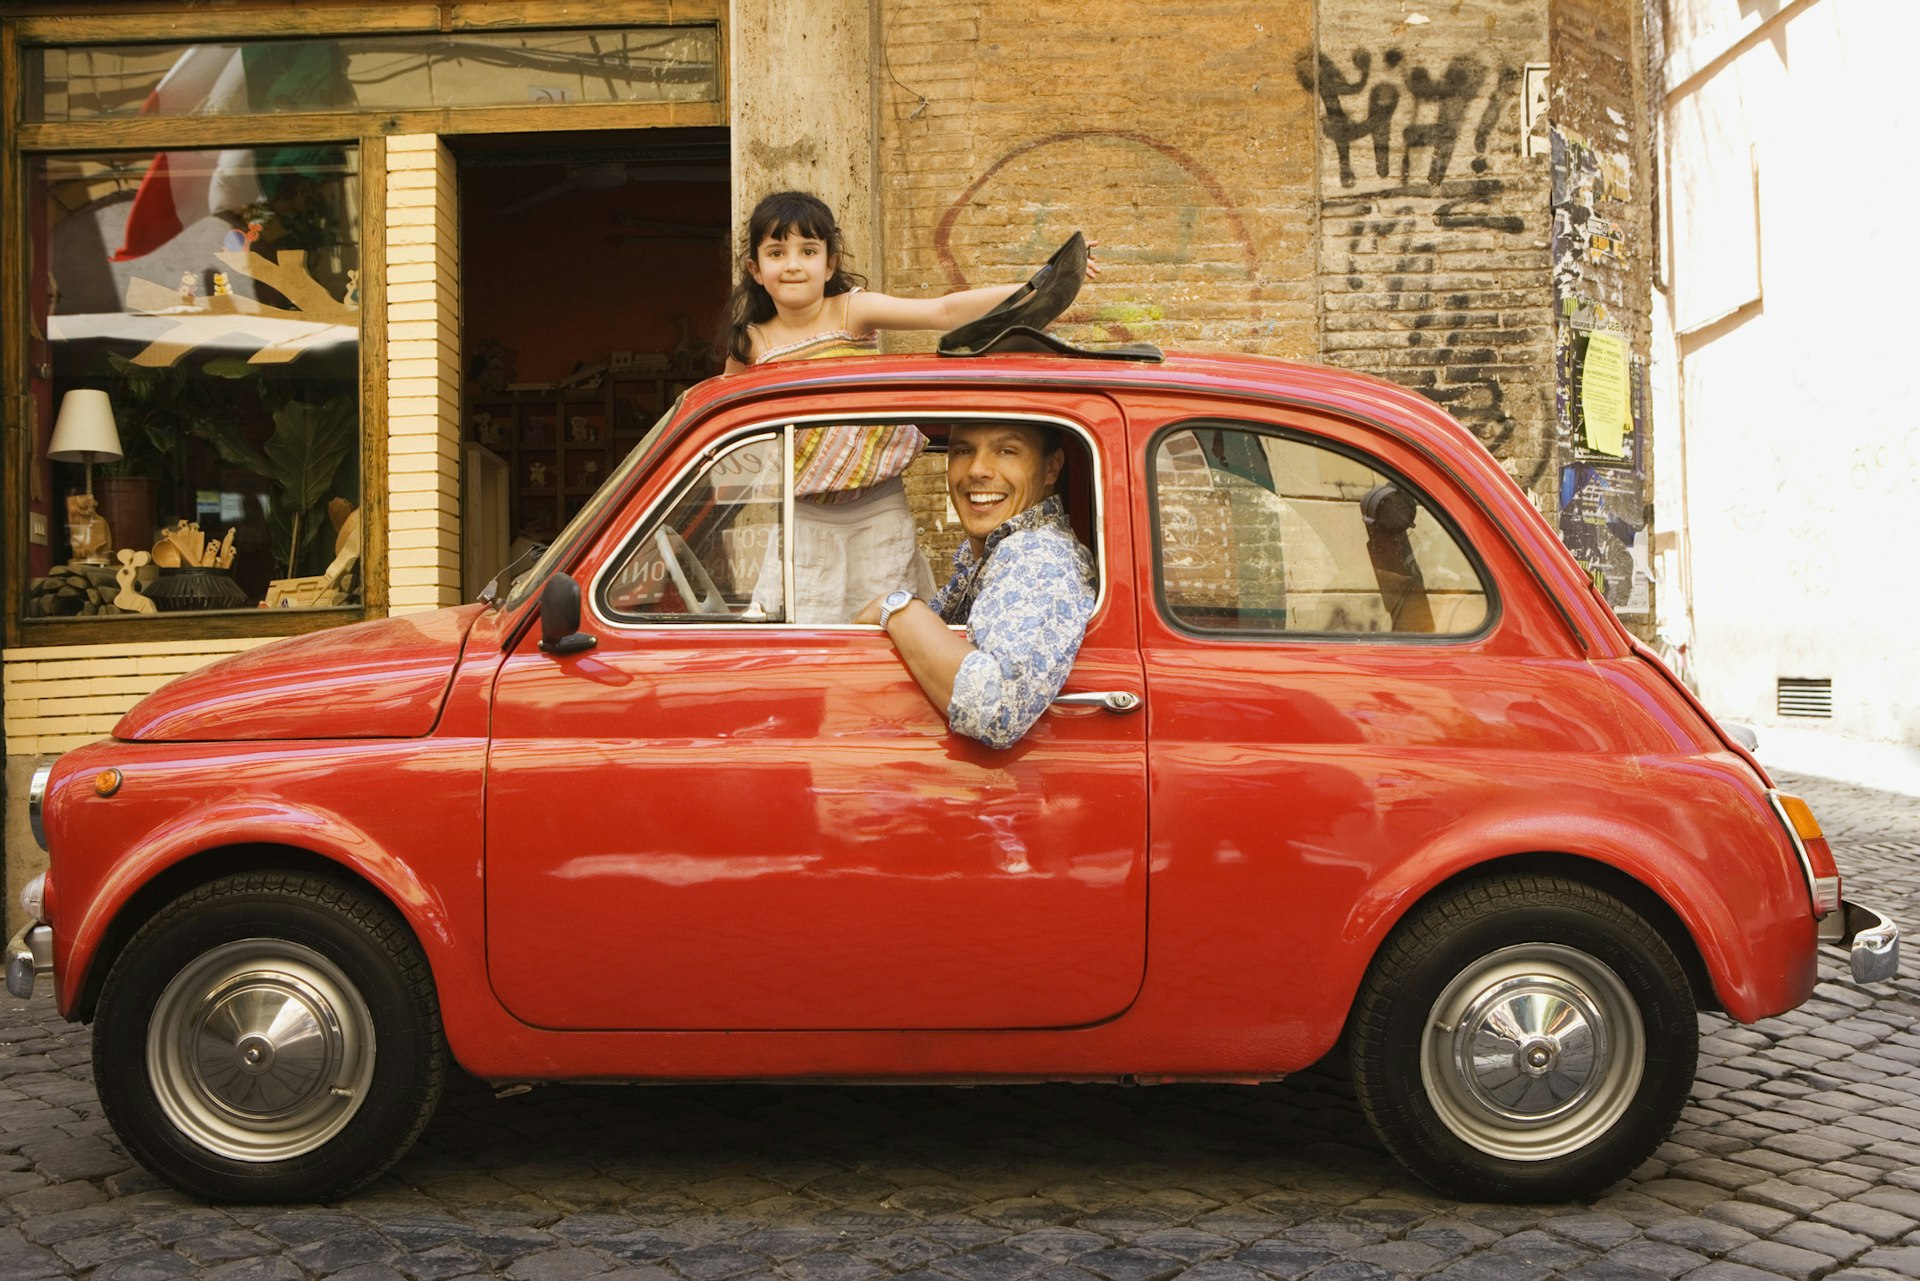 A smiling father and daughter in a Fiat 500 car in Italy, with the daughter standing up outside the sunroof